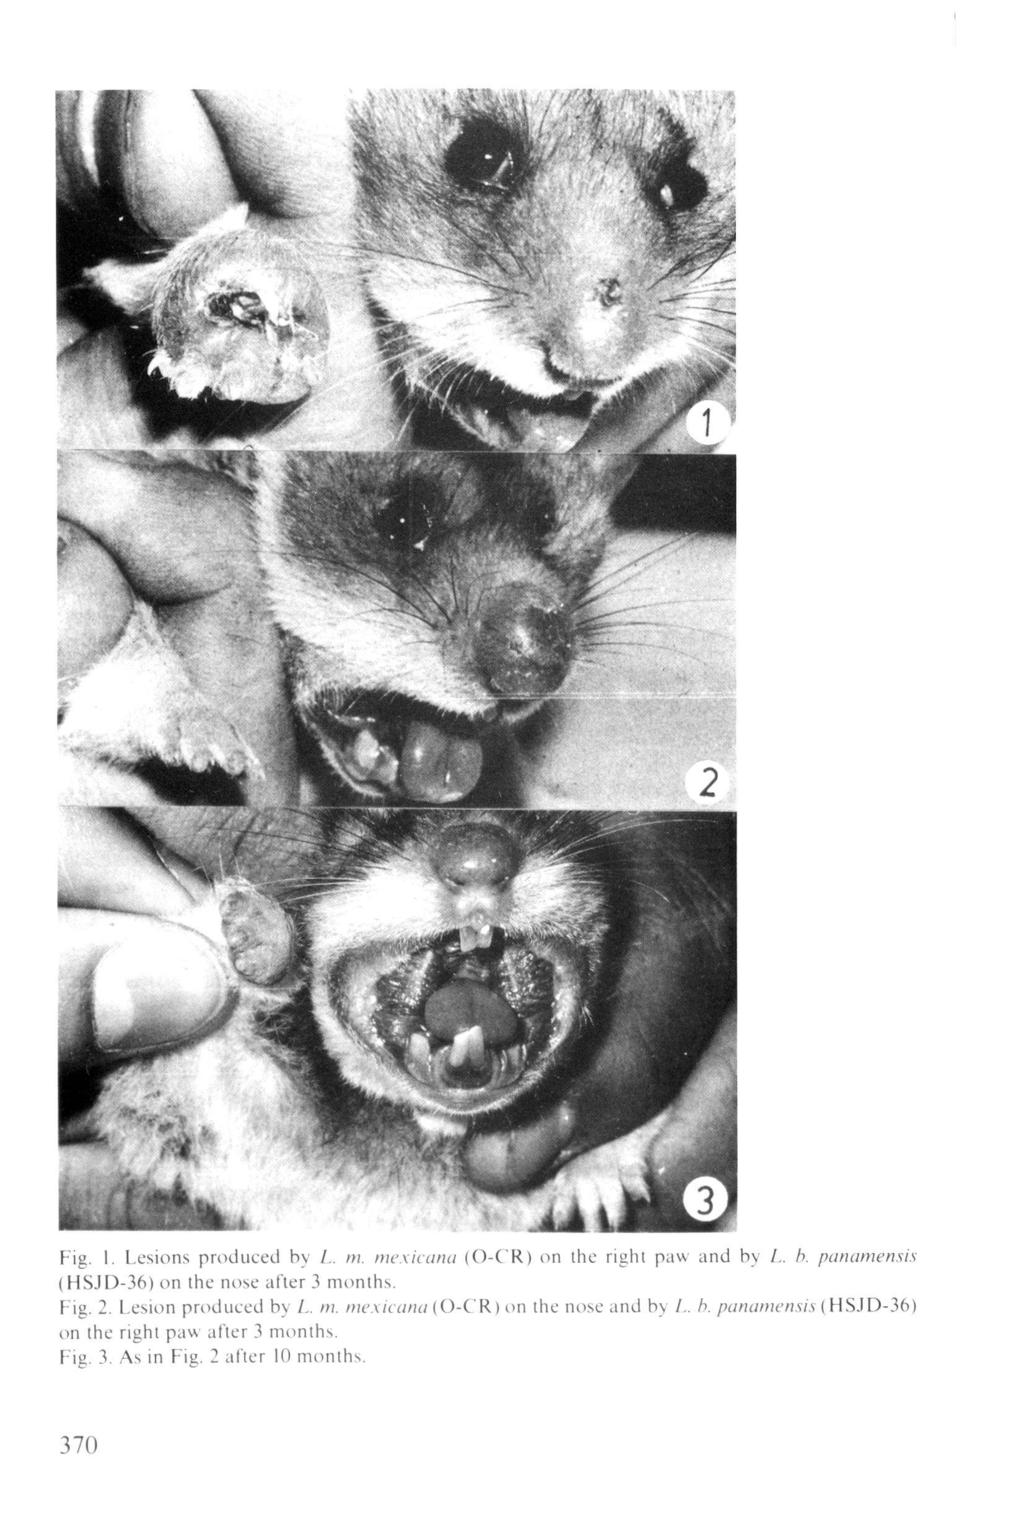 lb I r'i & * V i» <*ip \^ m. Fig. I. Lesions produced by L. m. mexicana (O-CR) on the right paw and by /.. b. panamensis (HSJD-36) on the nose after 3 months. Fig. 2.